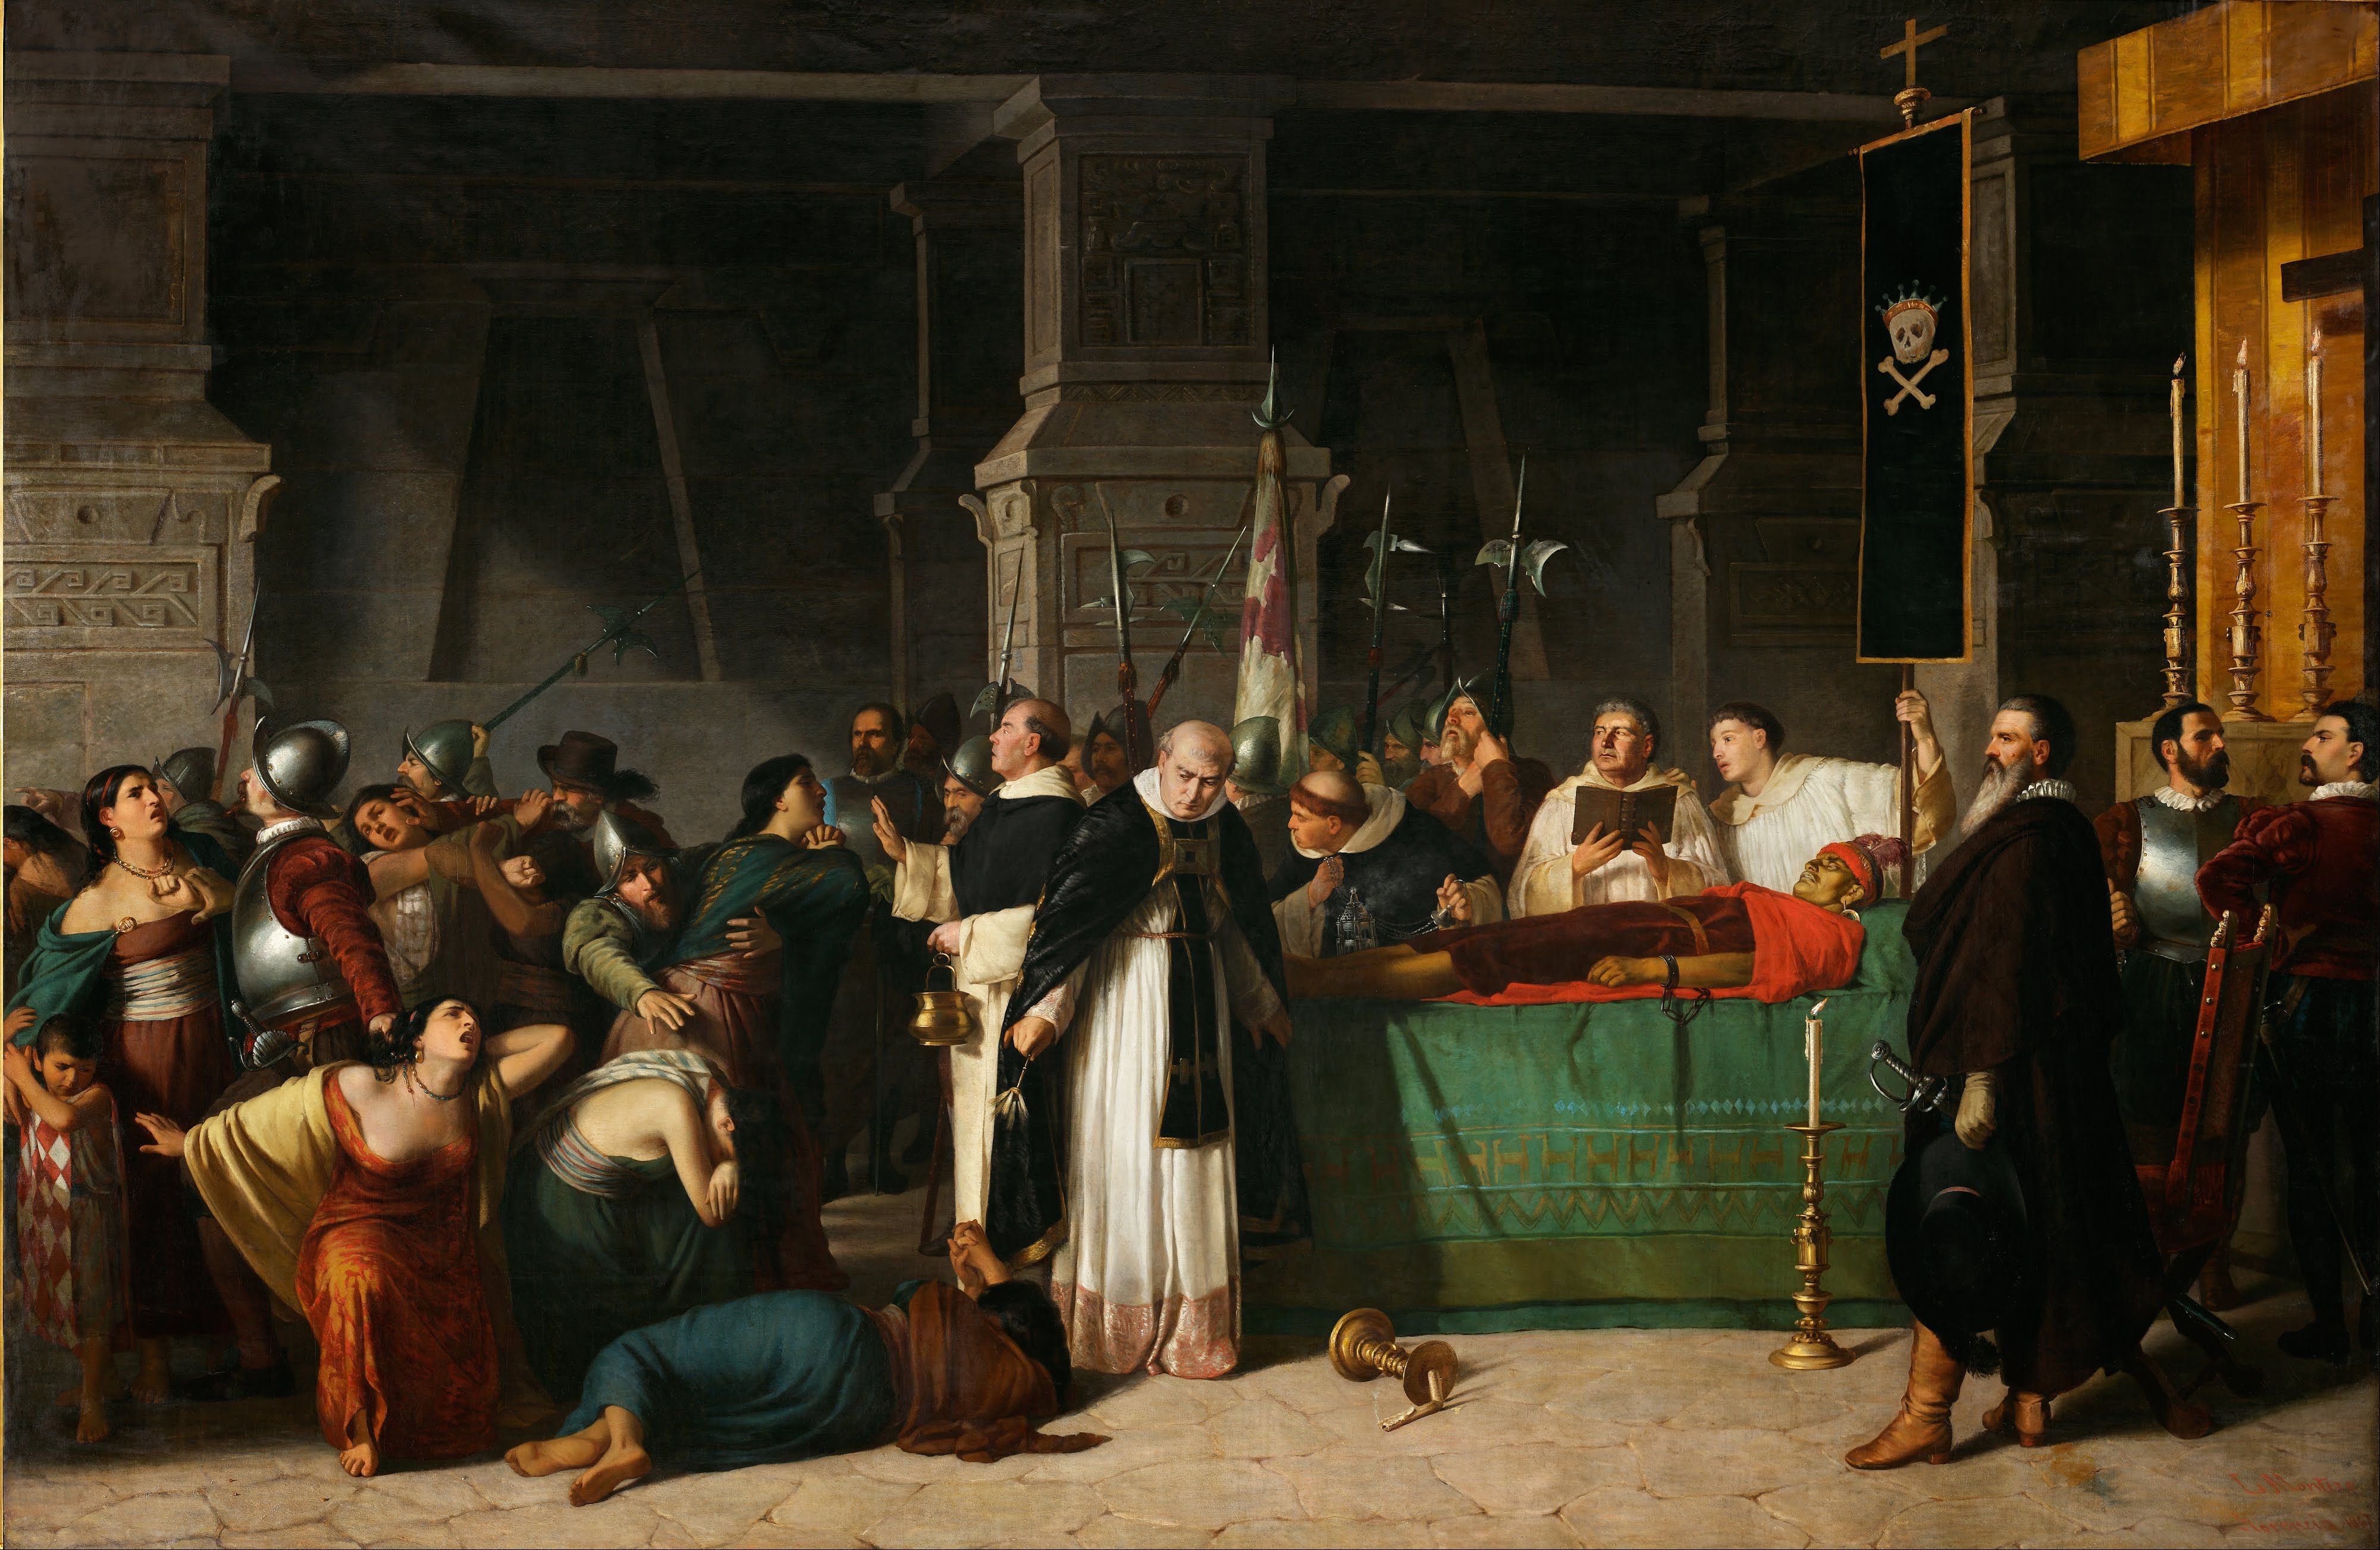 Luis Montero, The Funeral of Inca Atahualpa (1867). Oil on Canvas. One of the most influential works in the history of nineteenth-century Latin American art. The painting was looted by the Chilean military forces and returned after the peace treaty. 